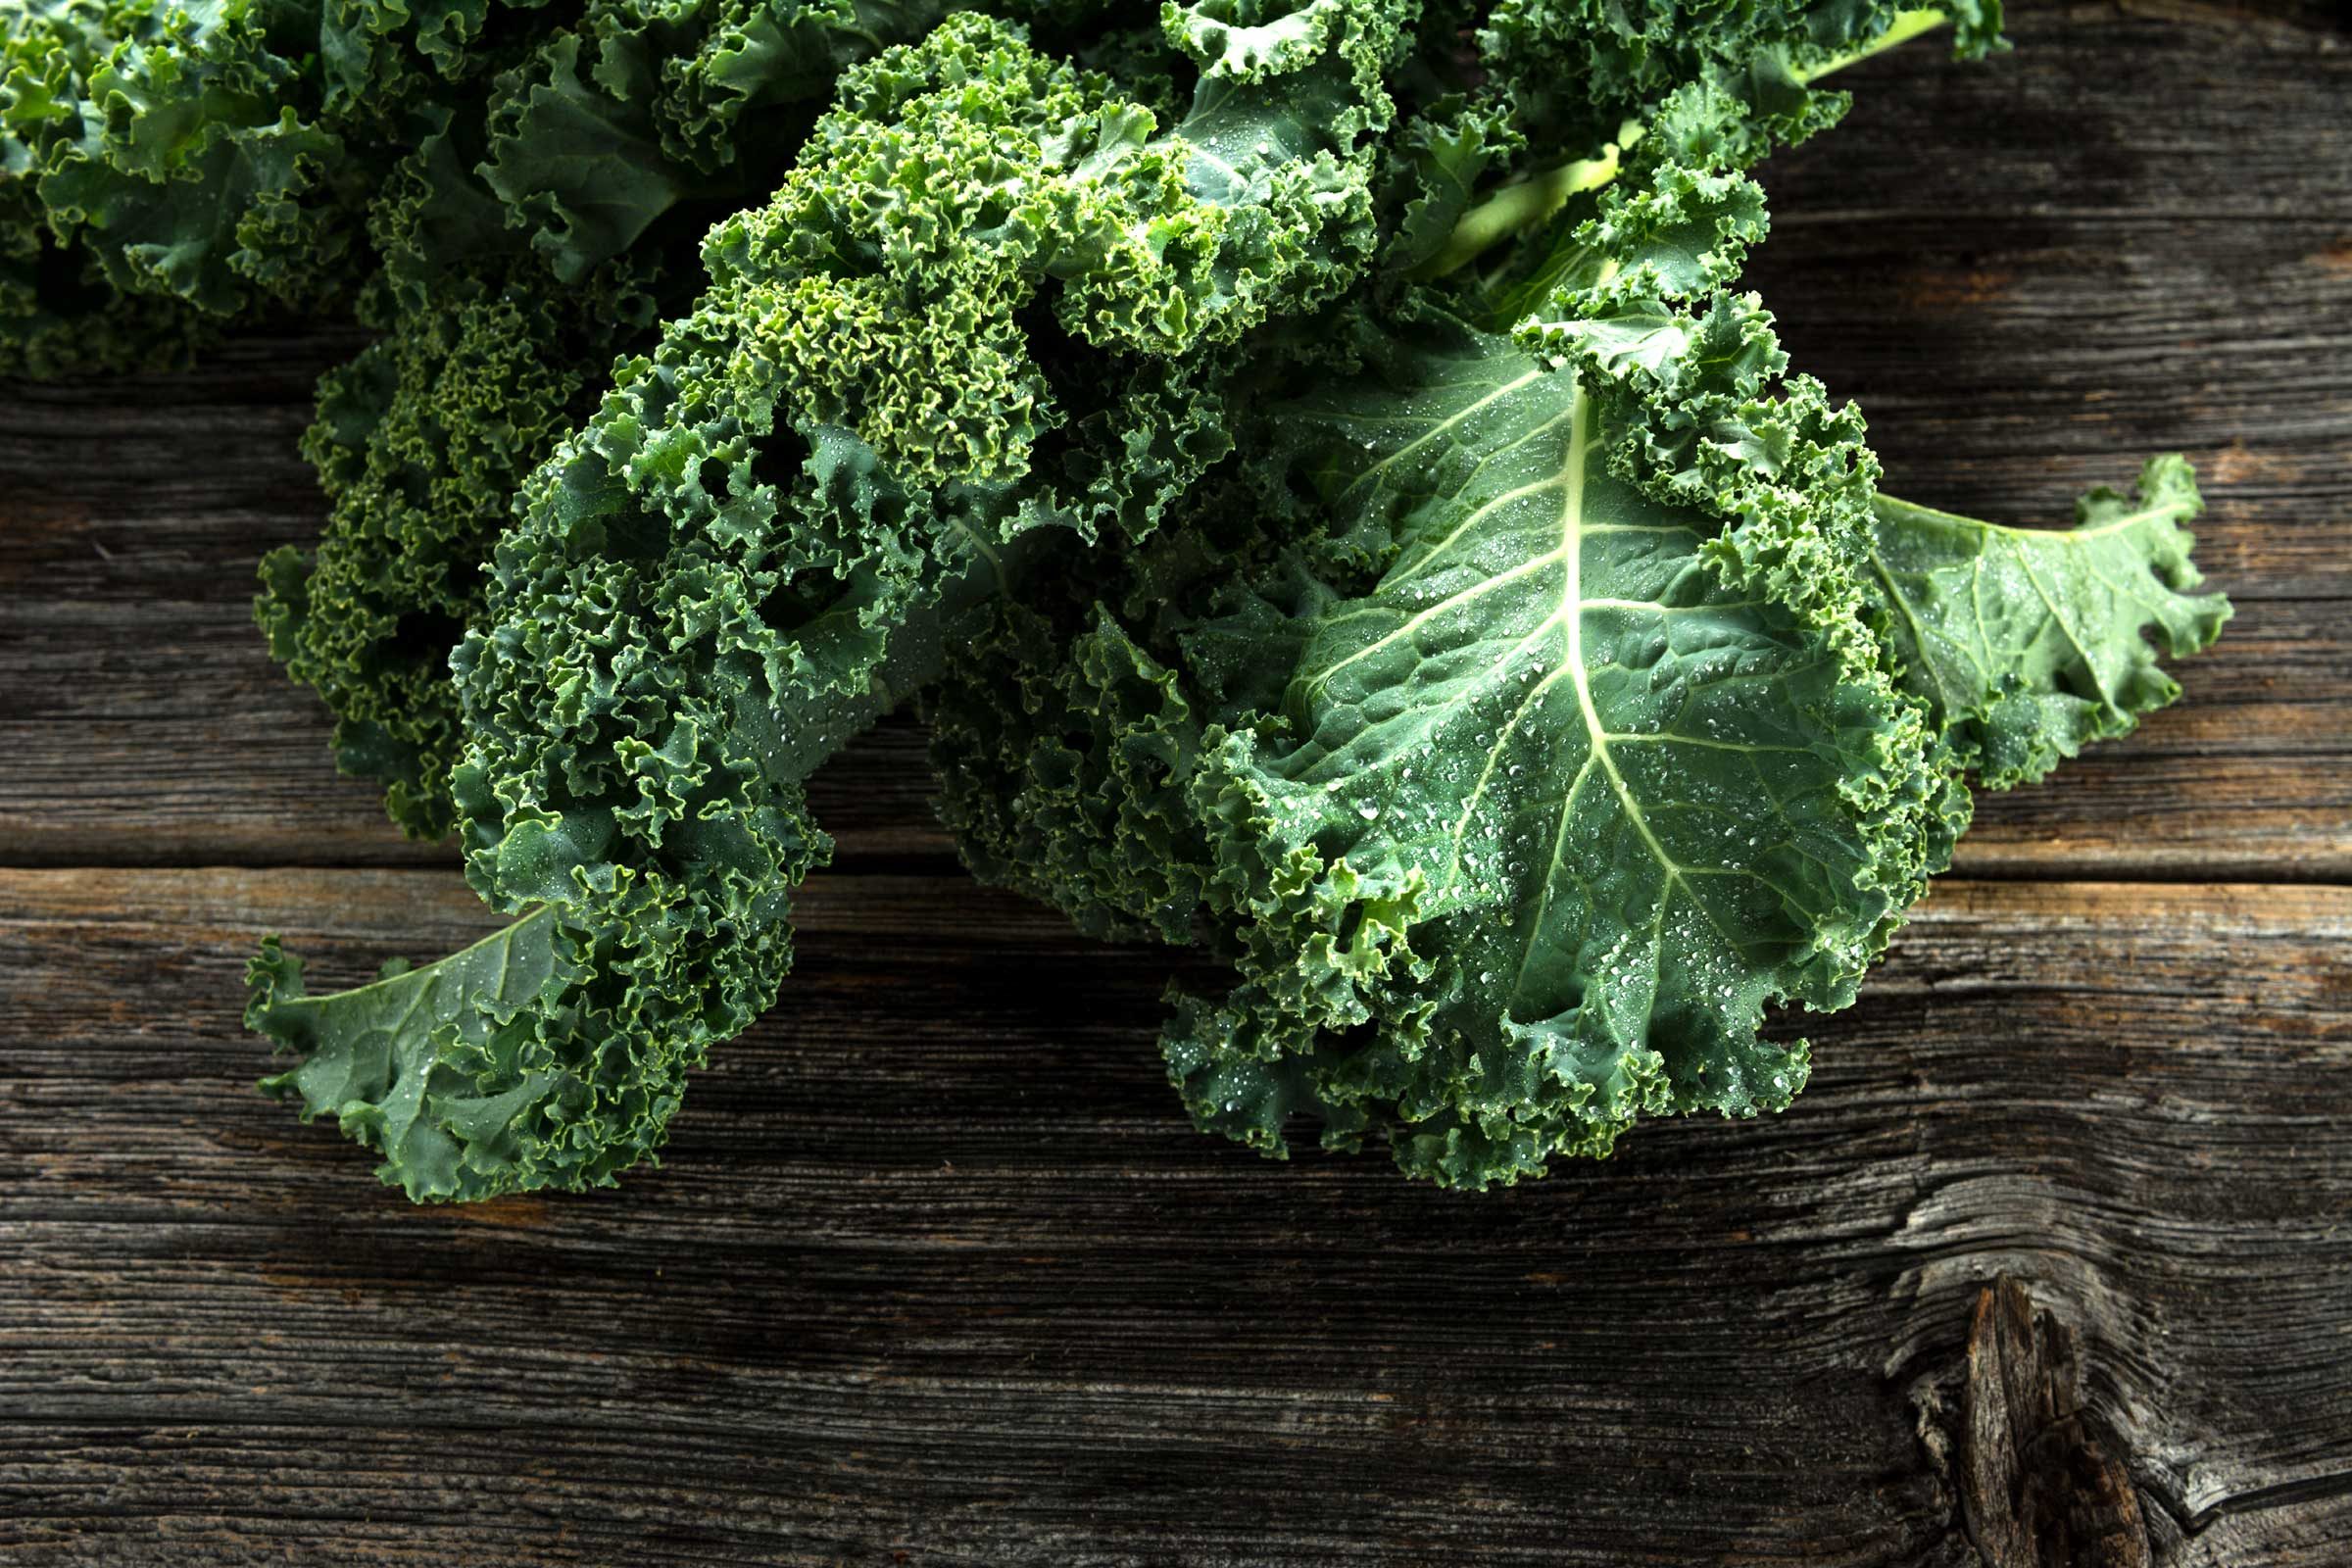 Load up on kale and other cooking greens